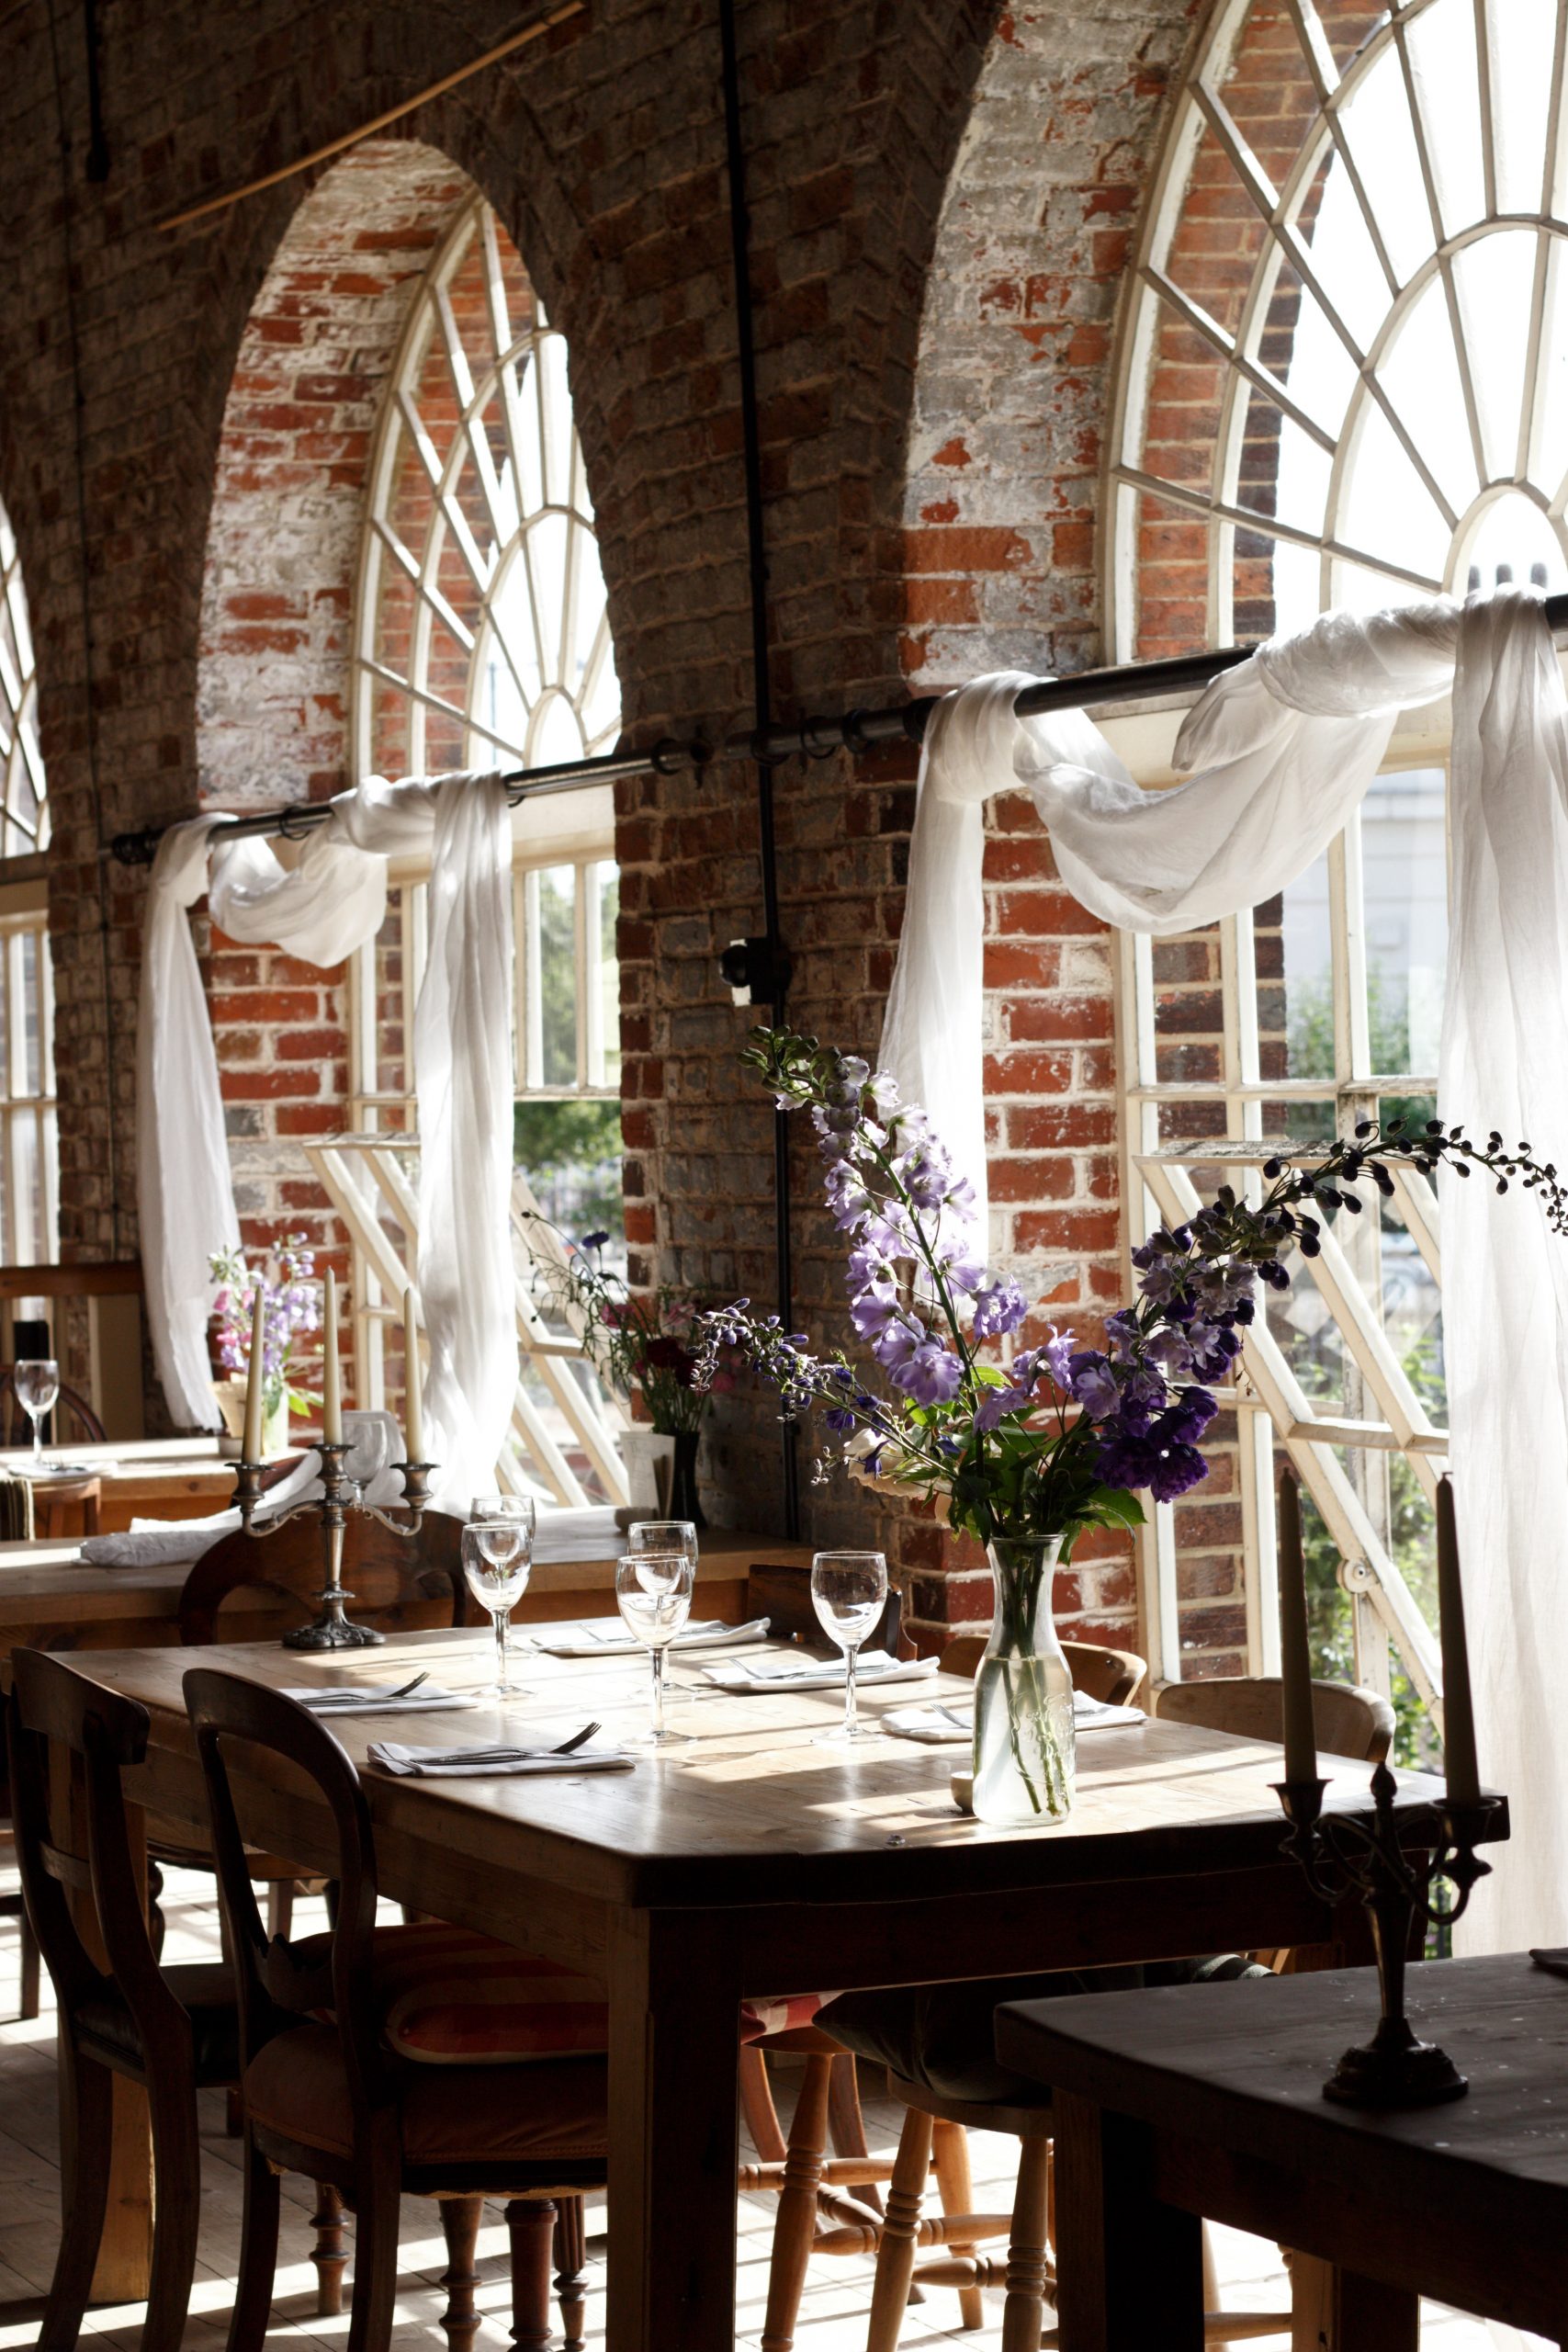 The Goods Shed, a Good Food Guide recommendation in Kent